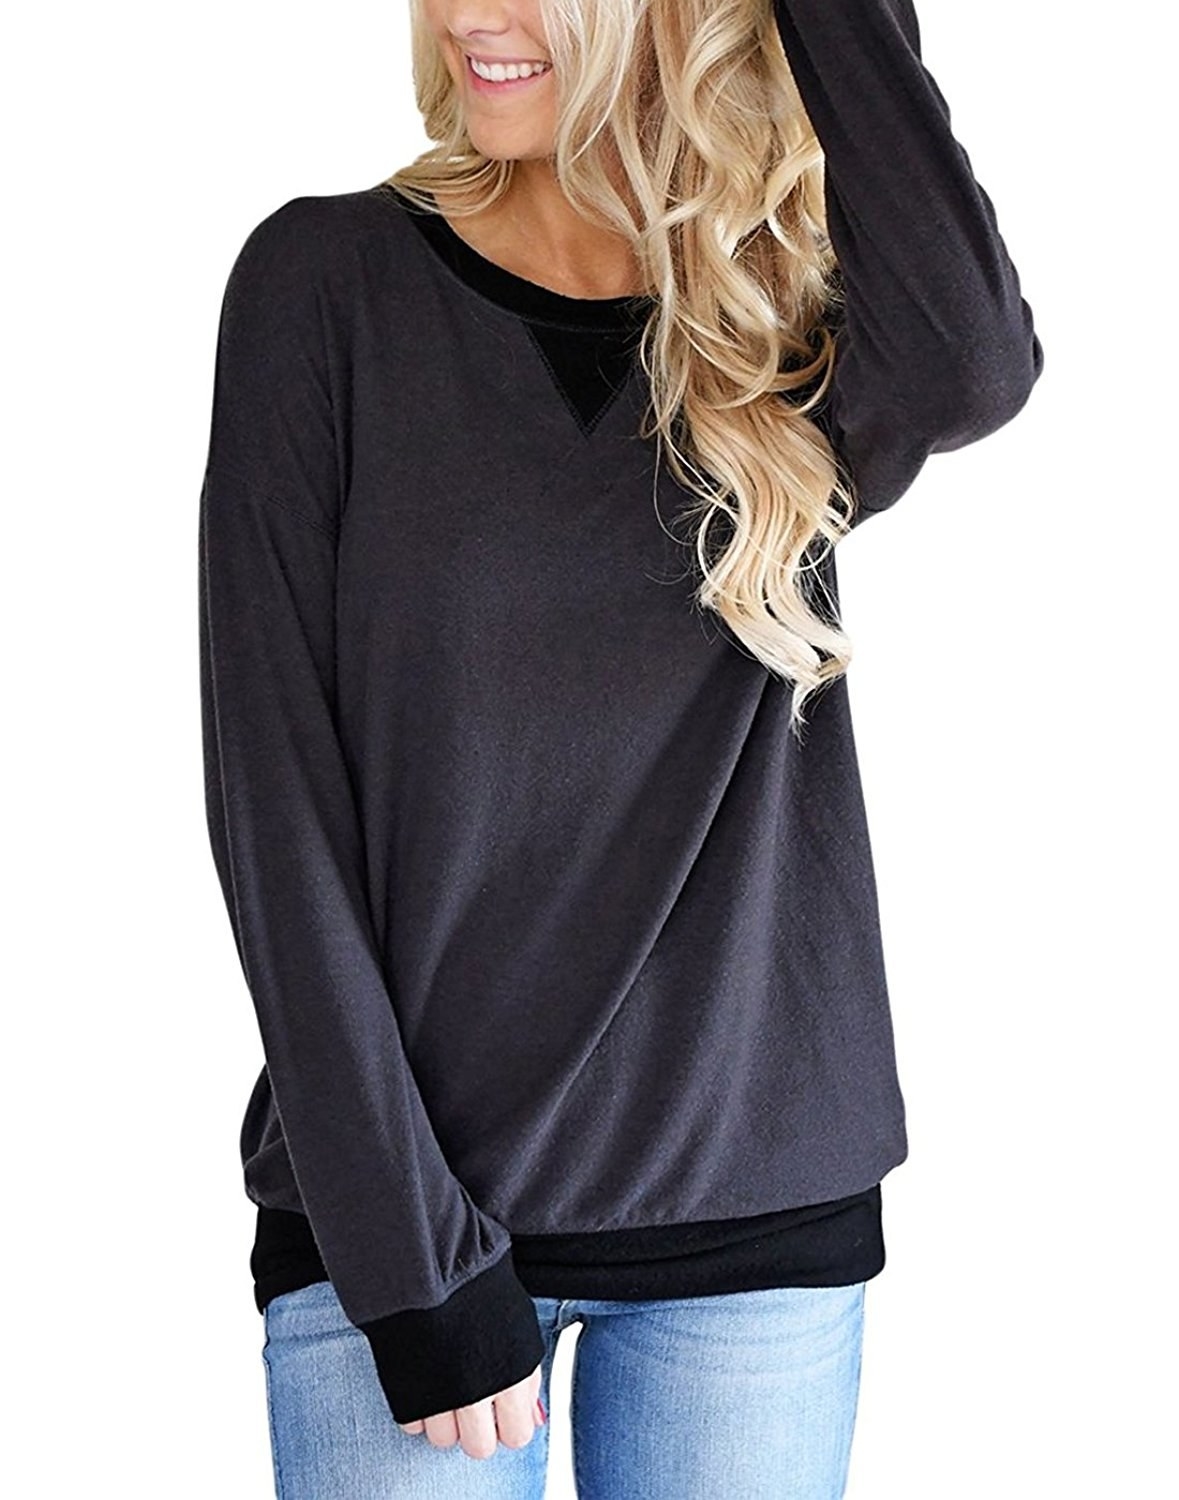 34 Cute And Warm Tops You Need If You're Sick Of Sweaters